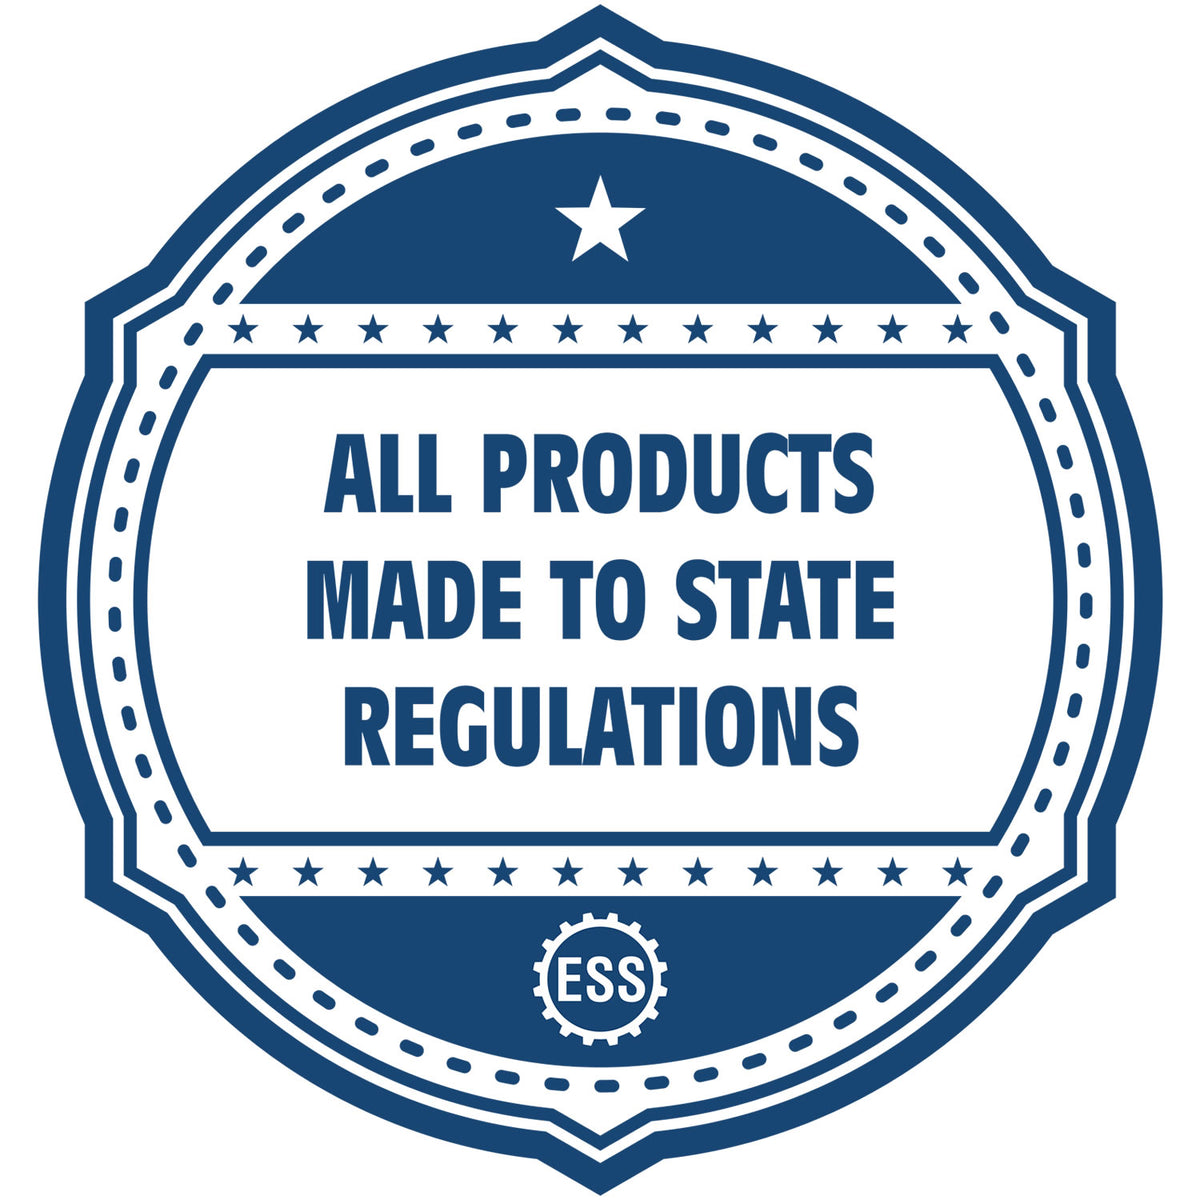 A blue icon or badge for the Slim Pre-Inked Oregon Professional Geologist Seal Stamp showing that this product is made in compliance with state regulations.